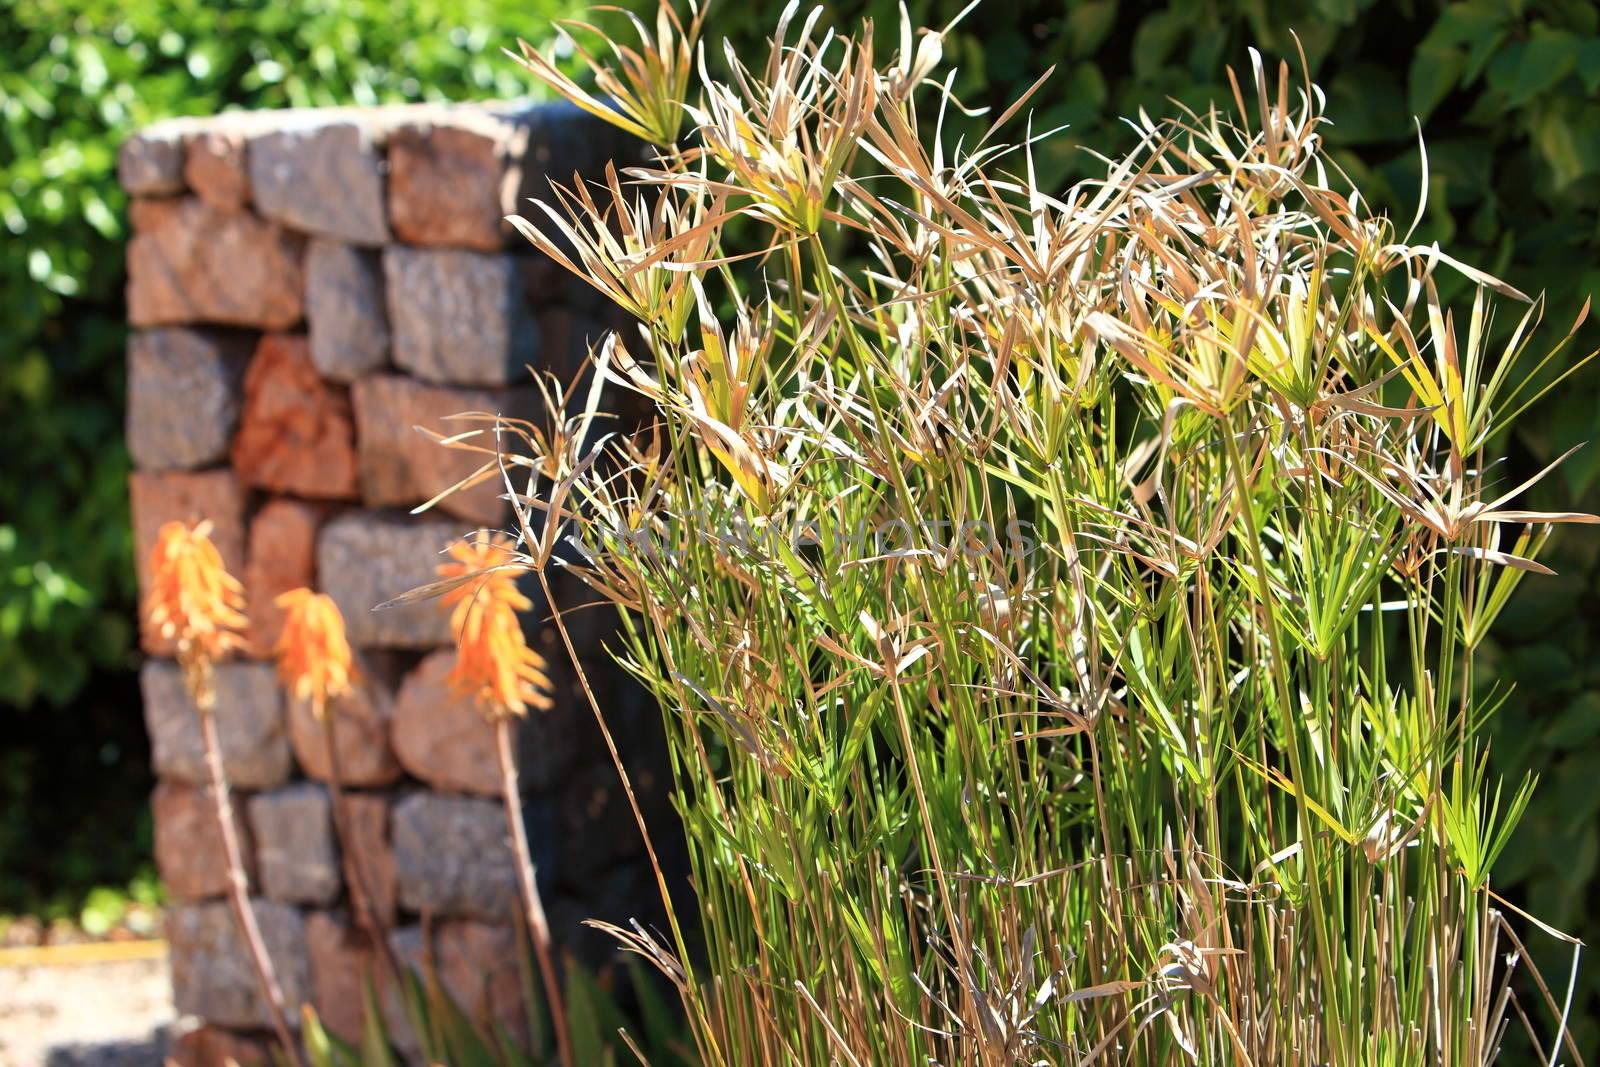 Ornamental papyrus grass growing alongside a stone wall in the garden